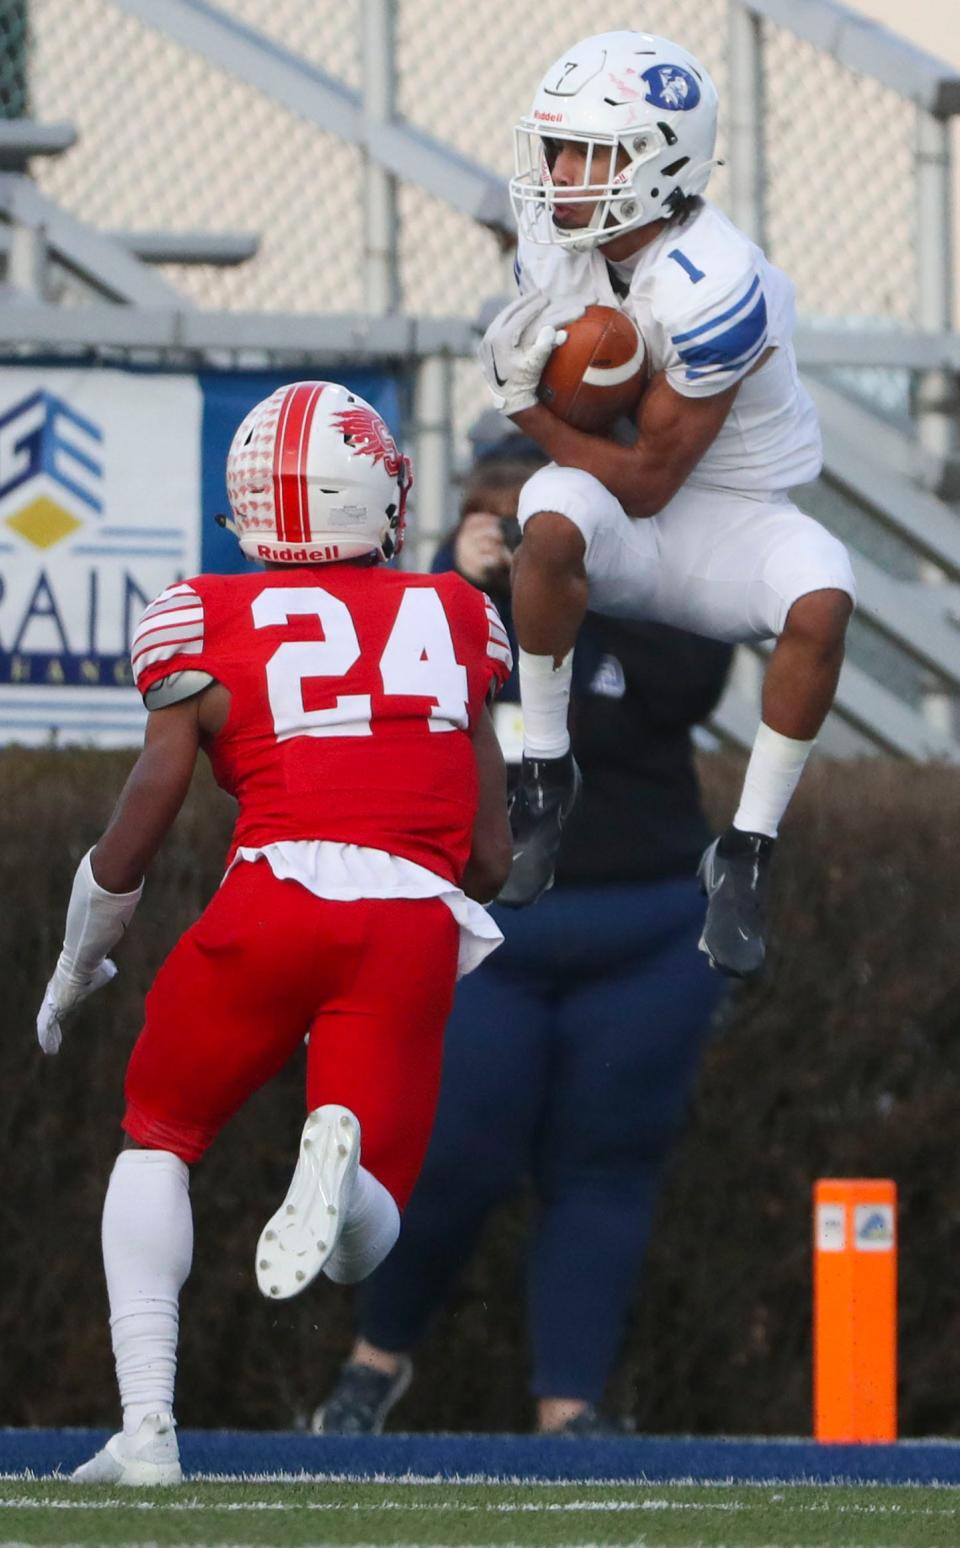 Dover's John Parker (1) makes a touchdown catch in the second quarter against Smyrna in the DIAA Class 3A championship at Delaware Stadium, Saturday, Dec 10, 2022.